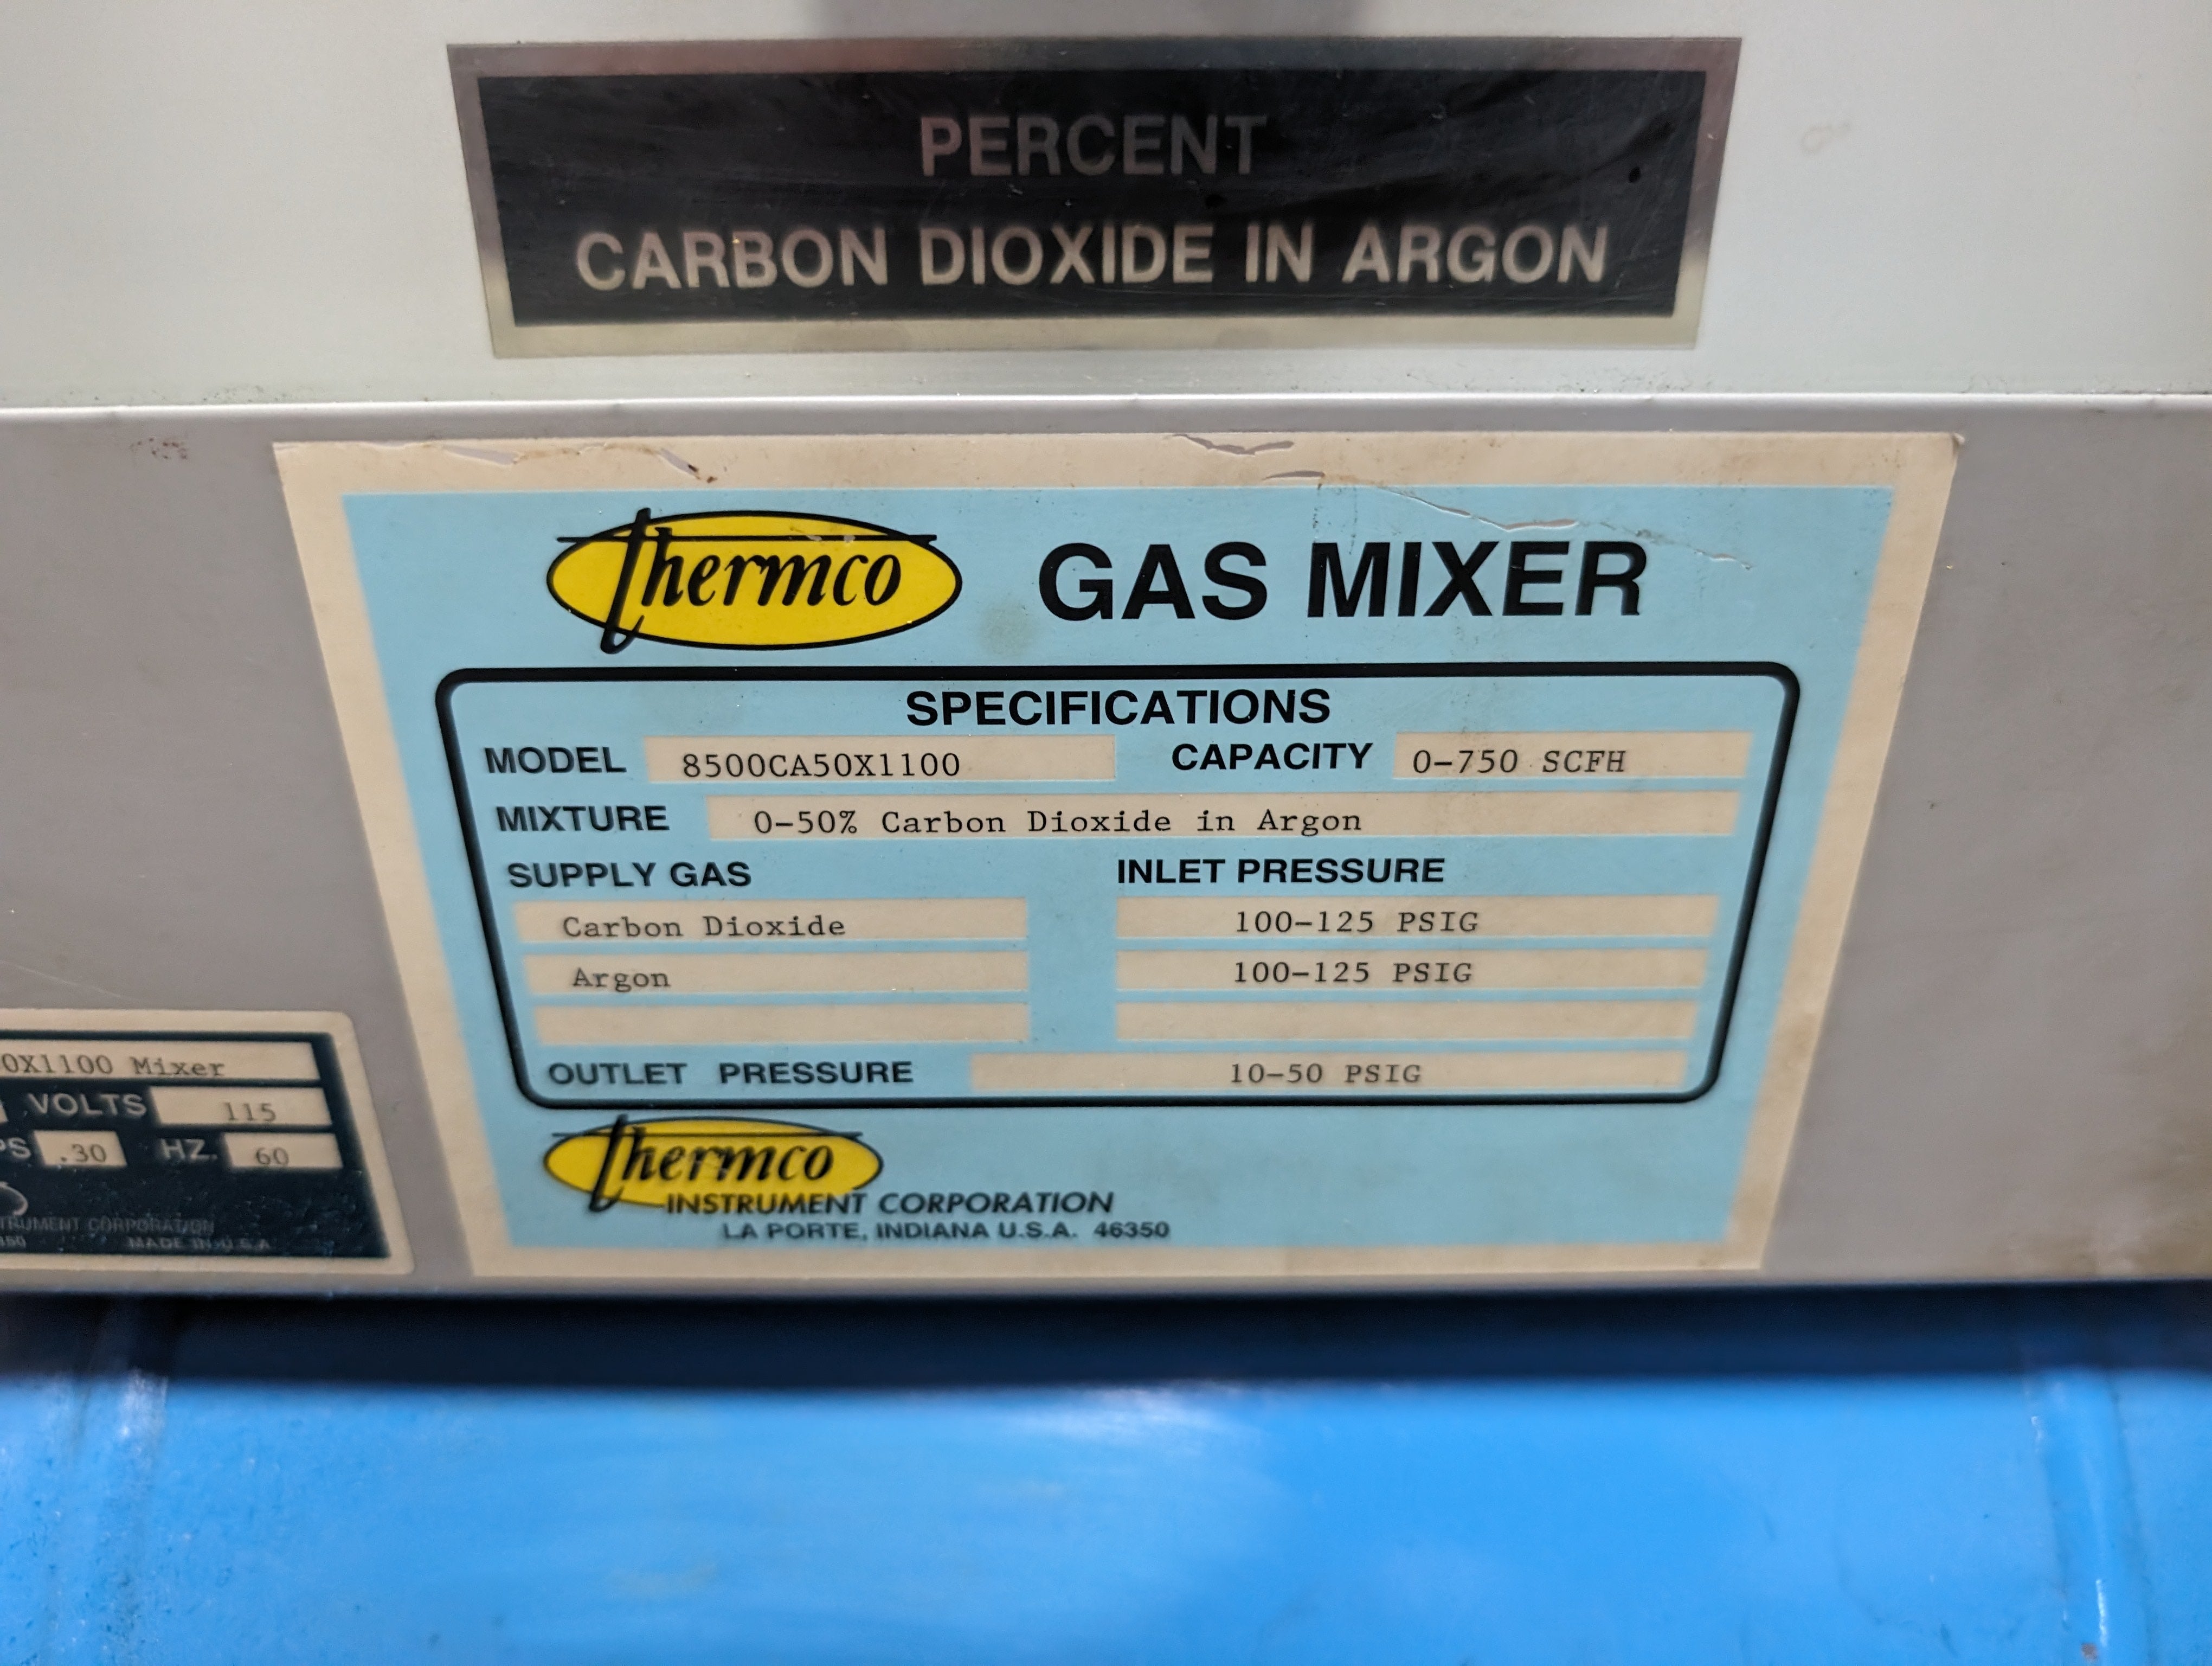 Thermco 8500CA50x1100 Gas Mixer 0-750 SCFH 0-50% Co2 in Argon Used